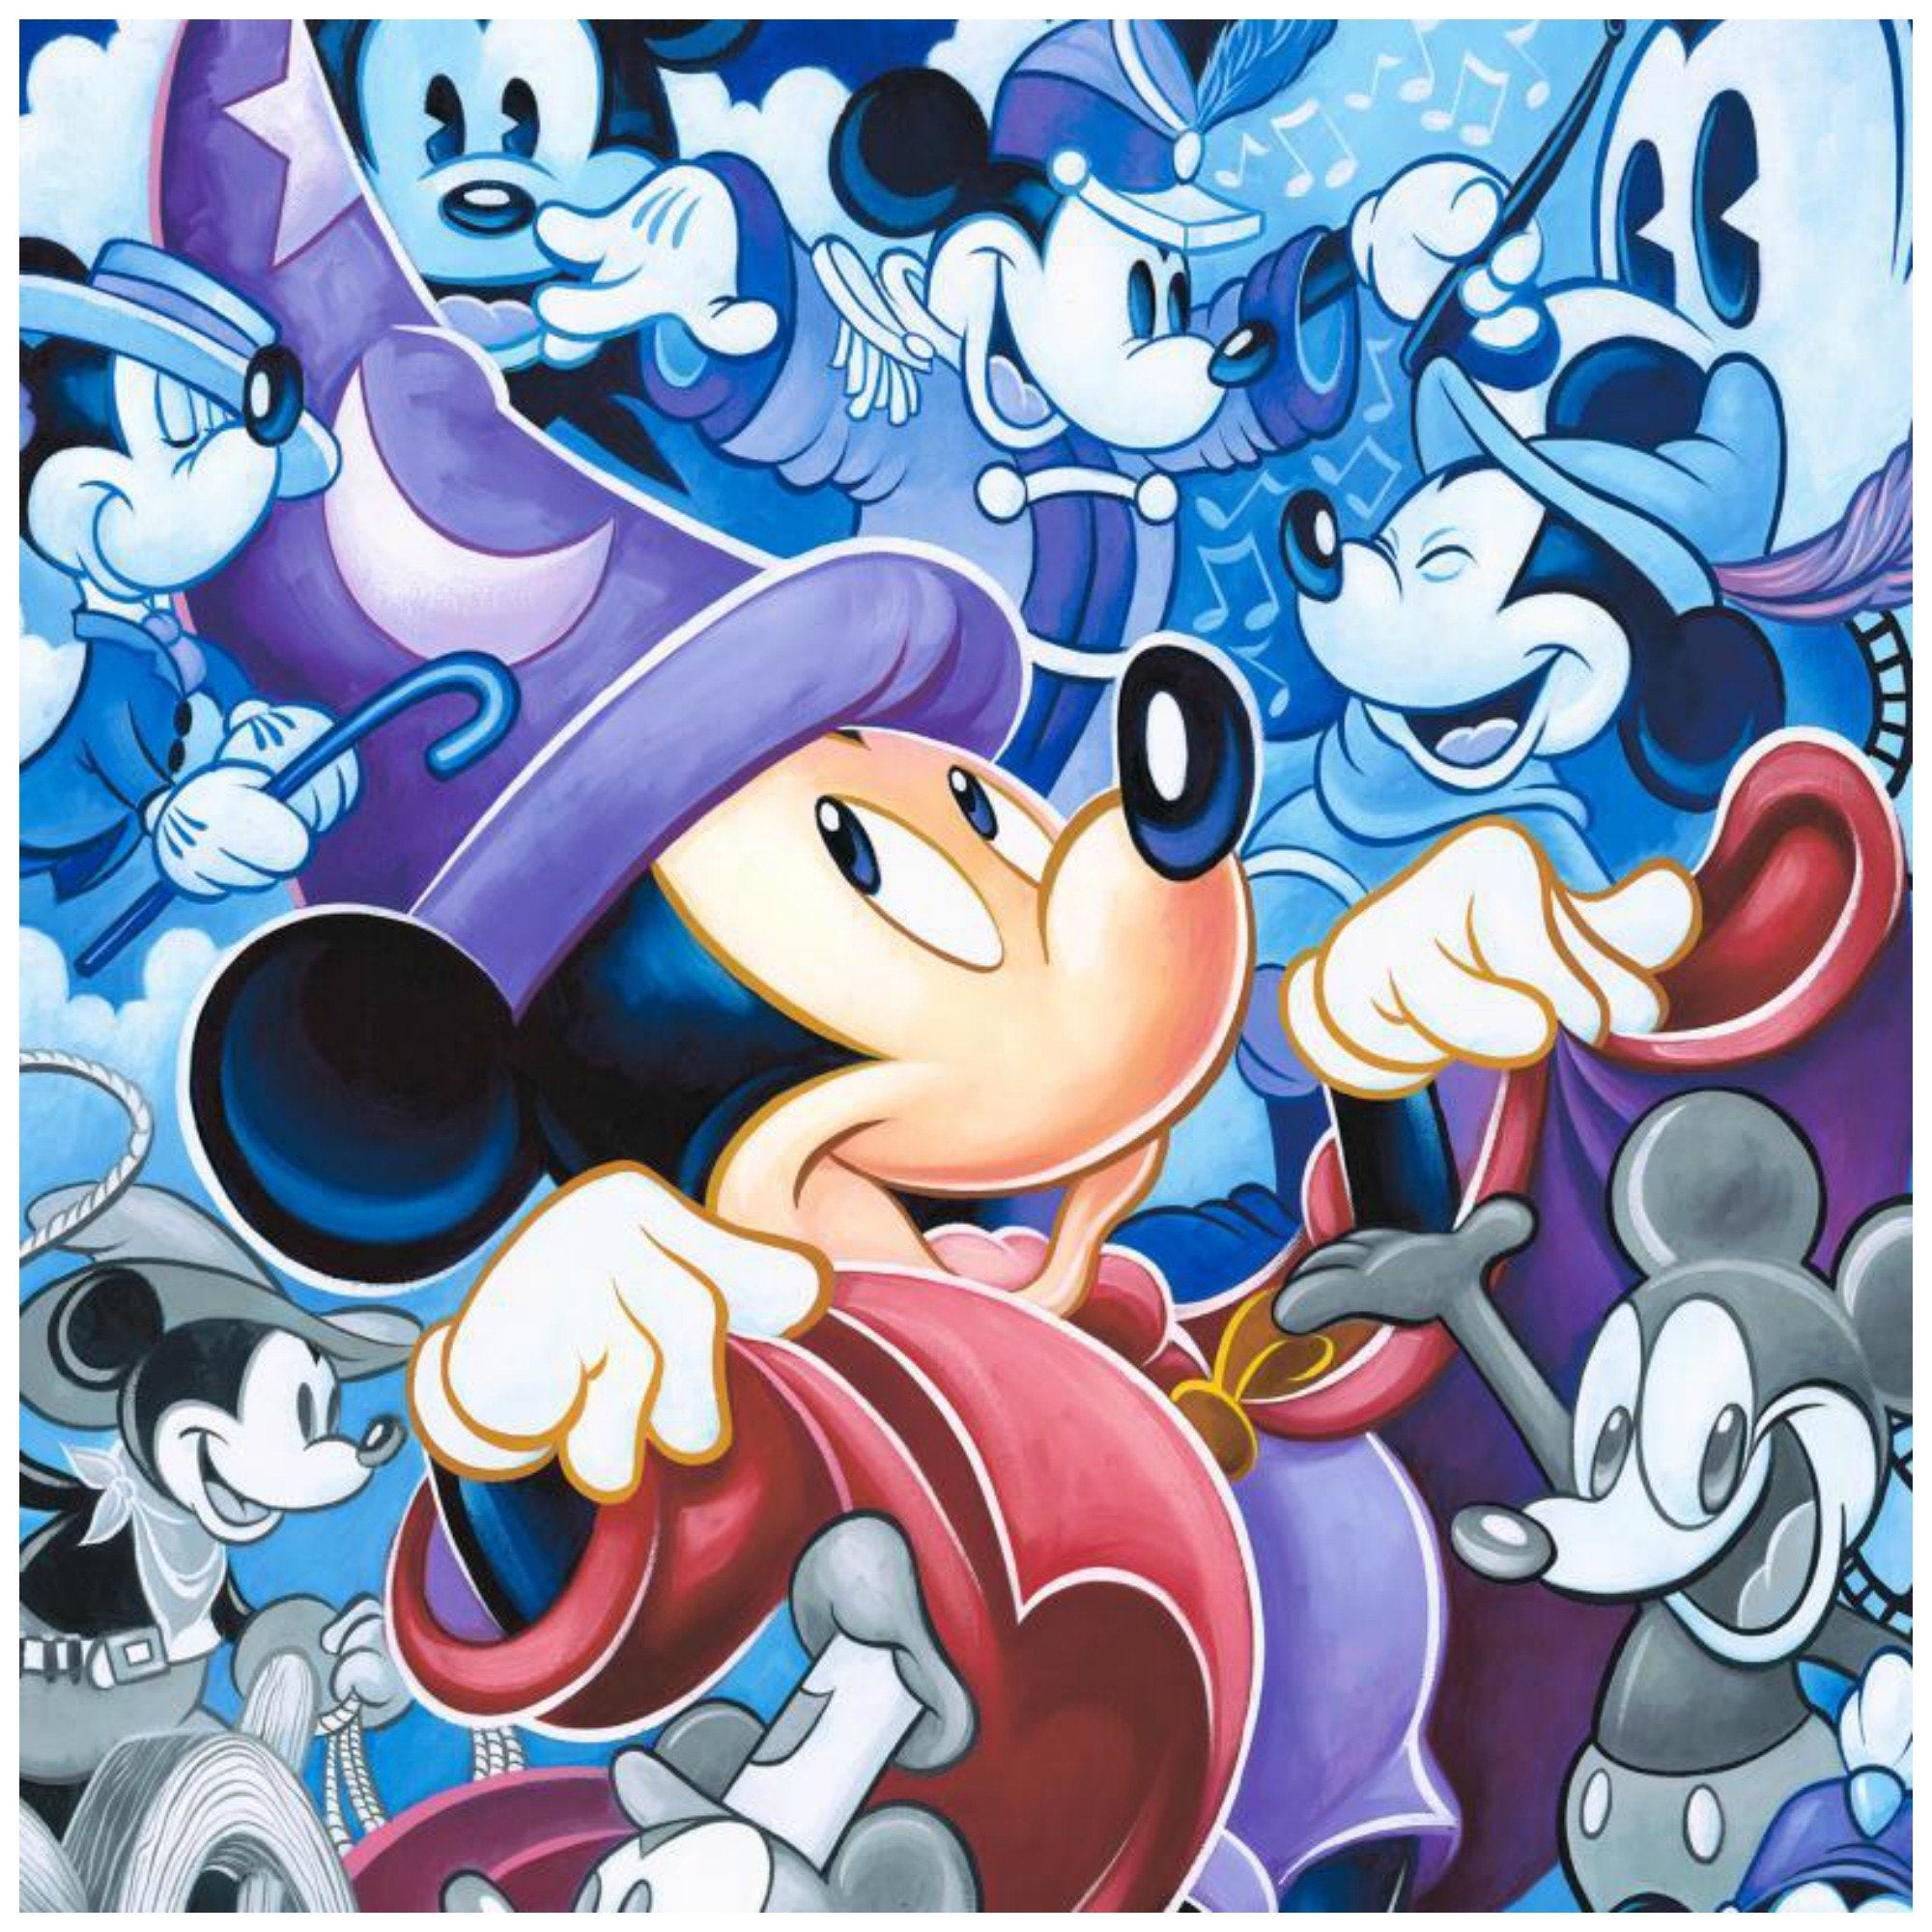 Celebrate the Mouse by Tim Rogerson Features Mickey the Sorcerer his most famous character role, along with the many other characters Mickey has played throughout the years -closeup.